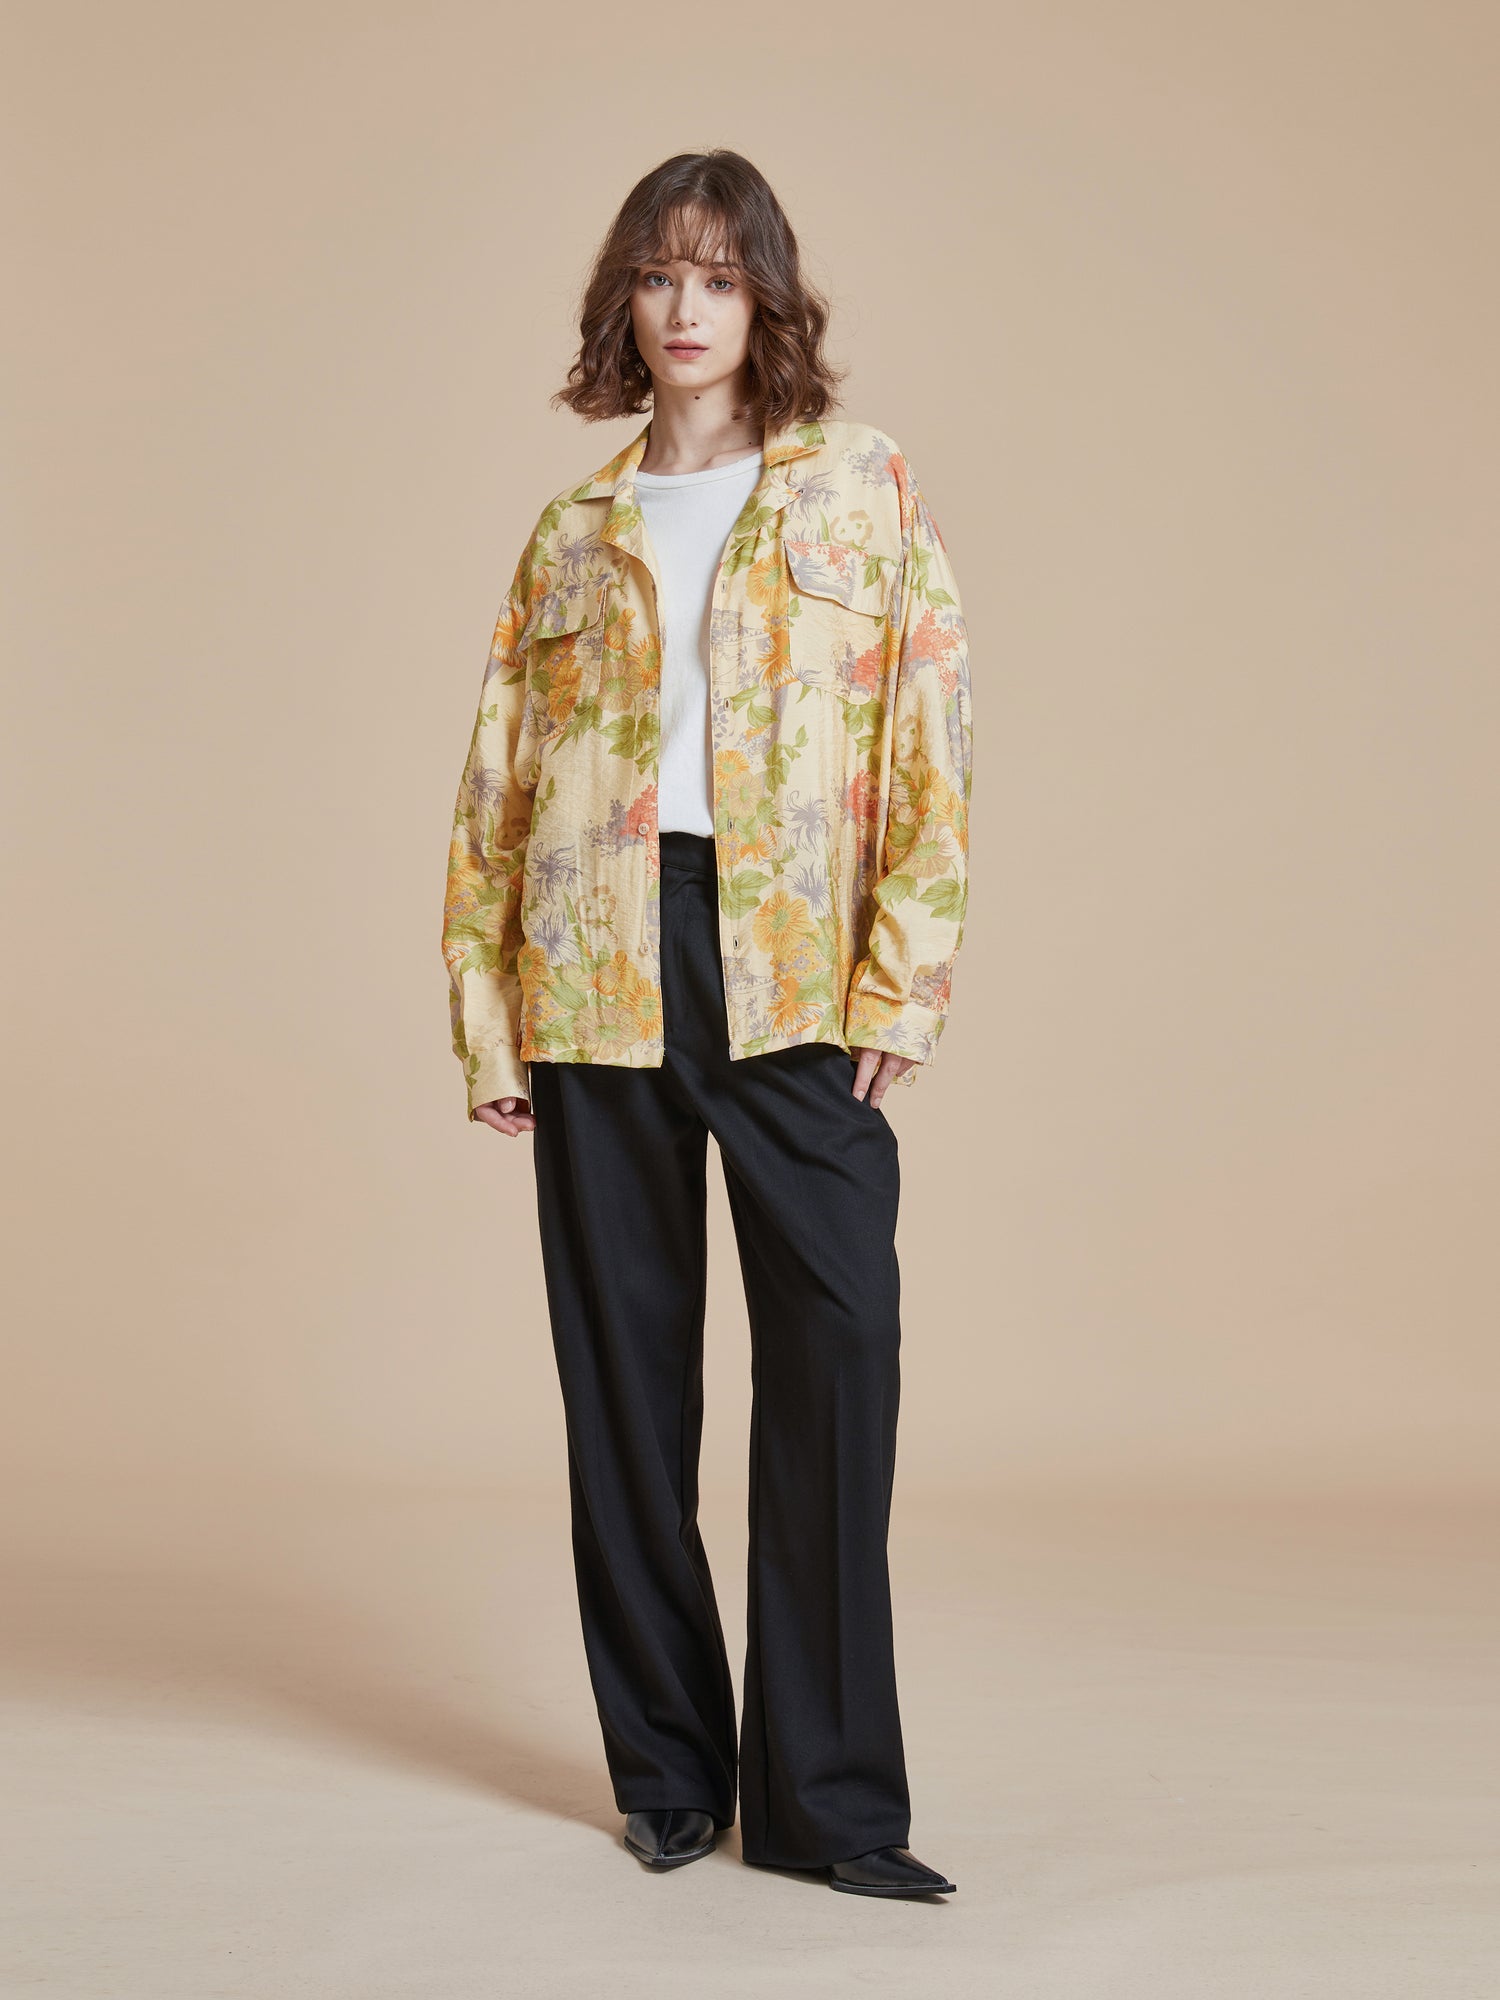 A model wearing a yellow floral jacket with nature-inspired Phulkari motifs and black trousers from Found's Meraj Vase Pot Long Sleeve Camp Shirt.